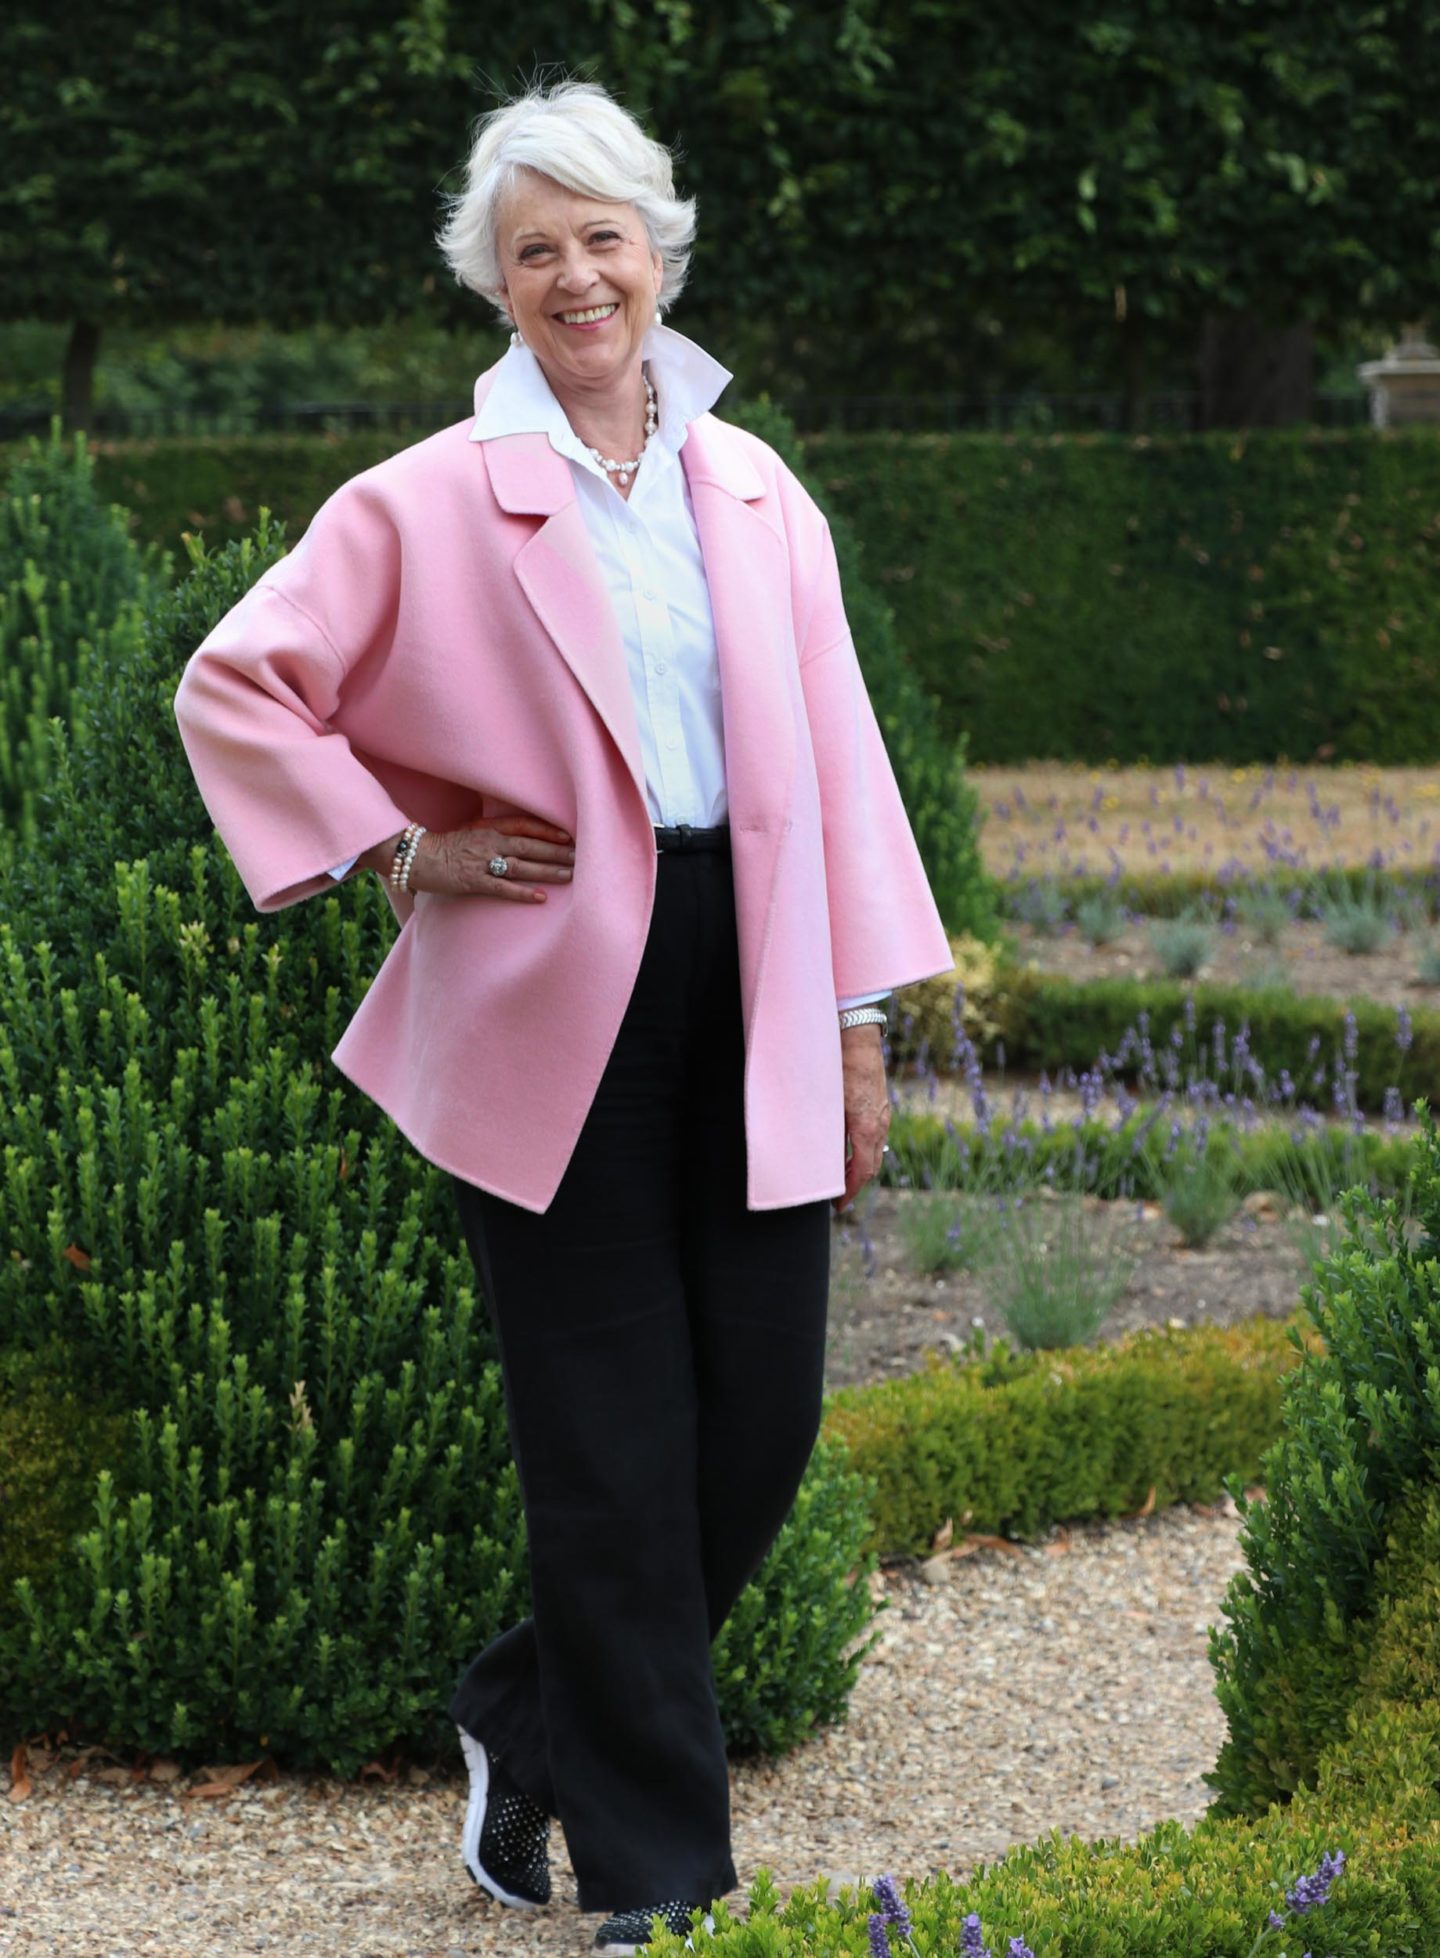 Add a touch of colour to a classic outfit - Chic at any age